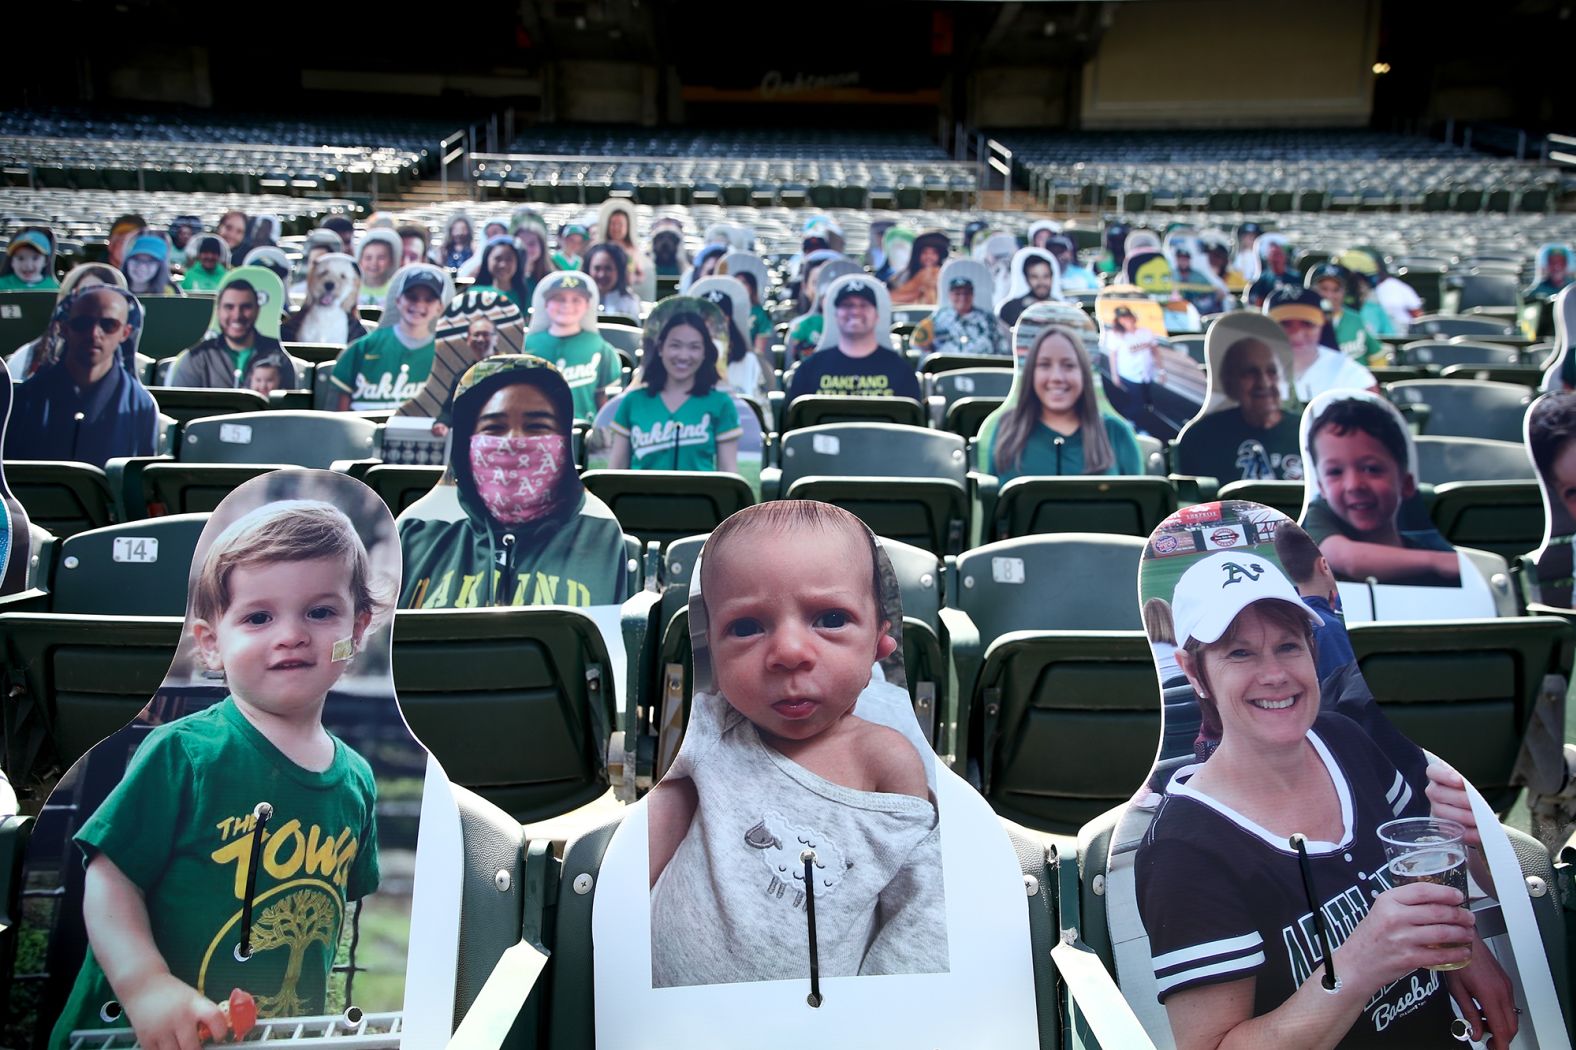 A closer look at some of the fan cutouts in Oakland.